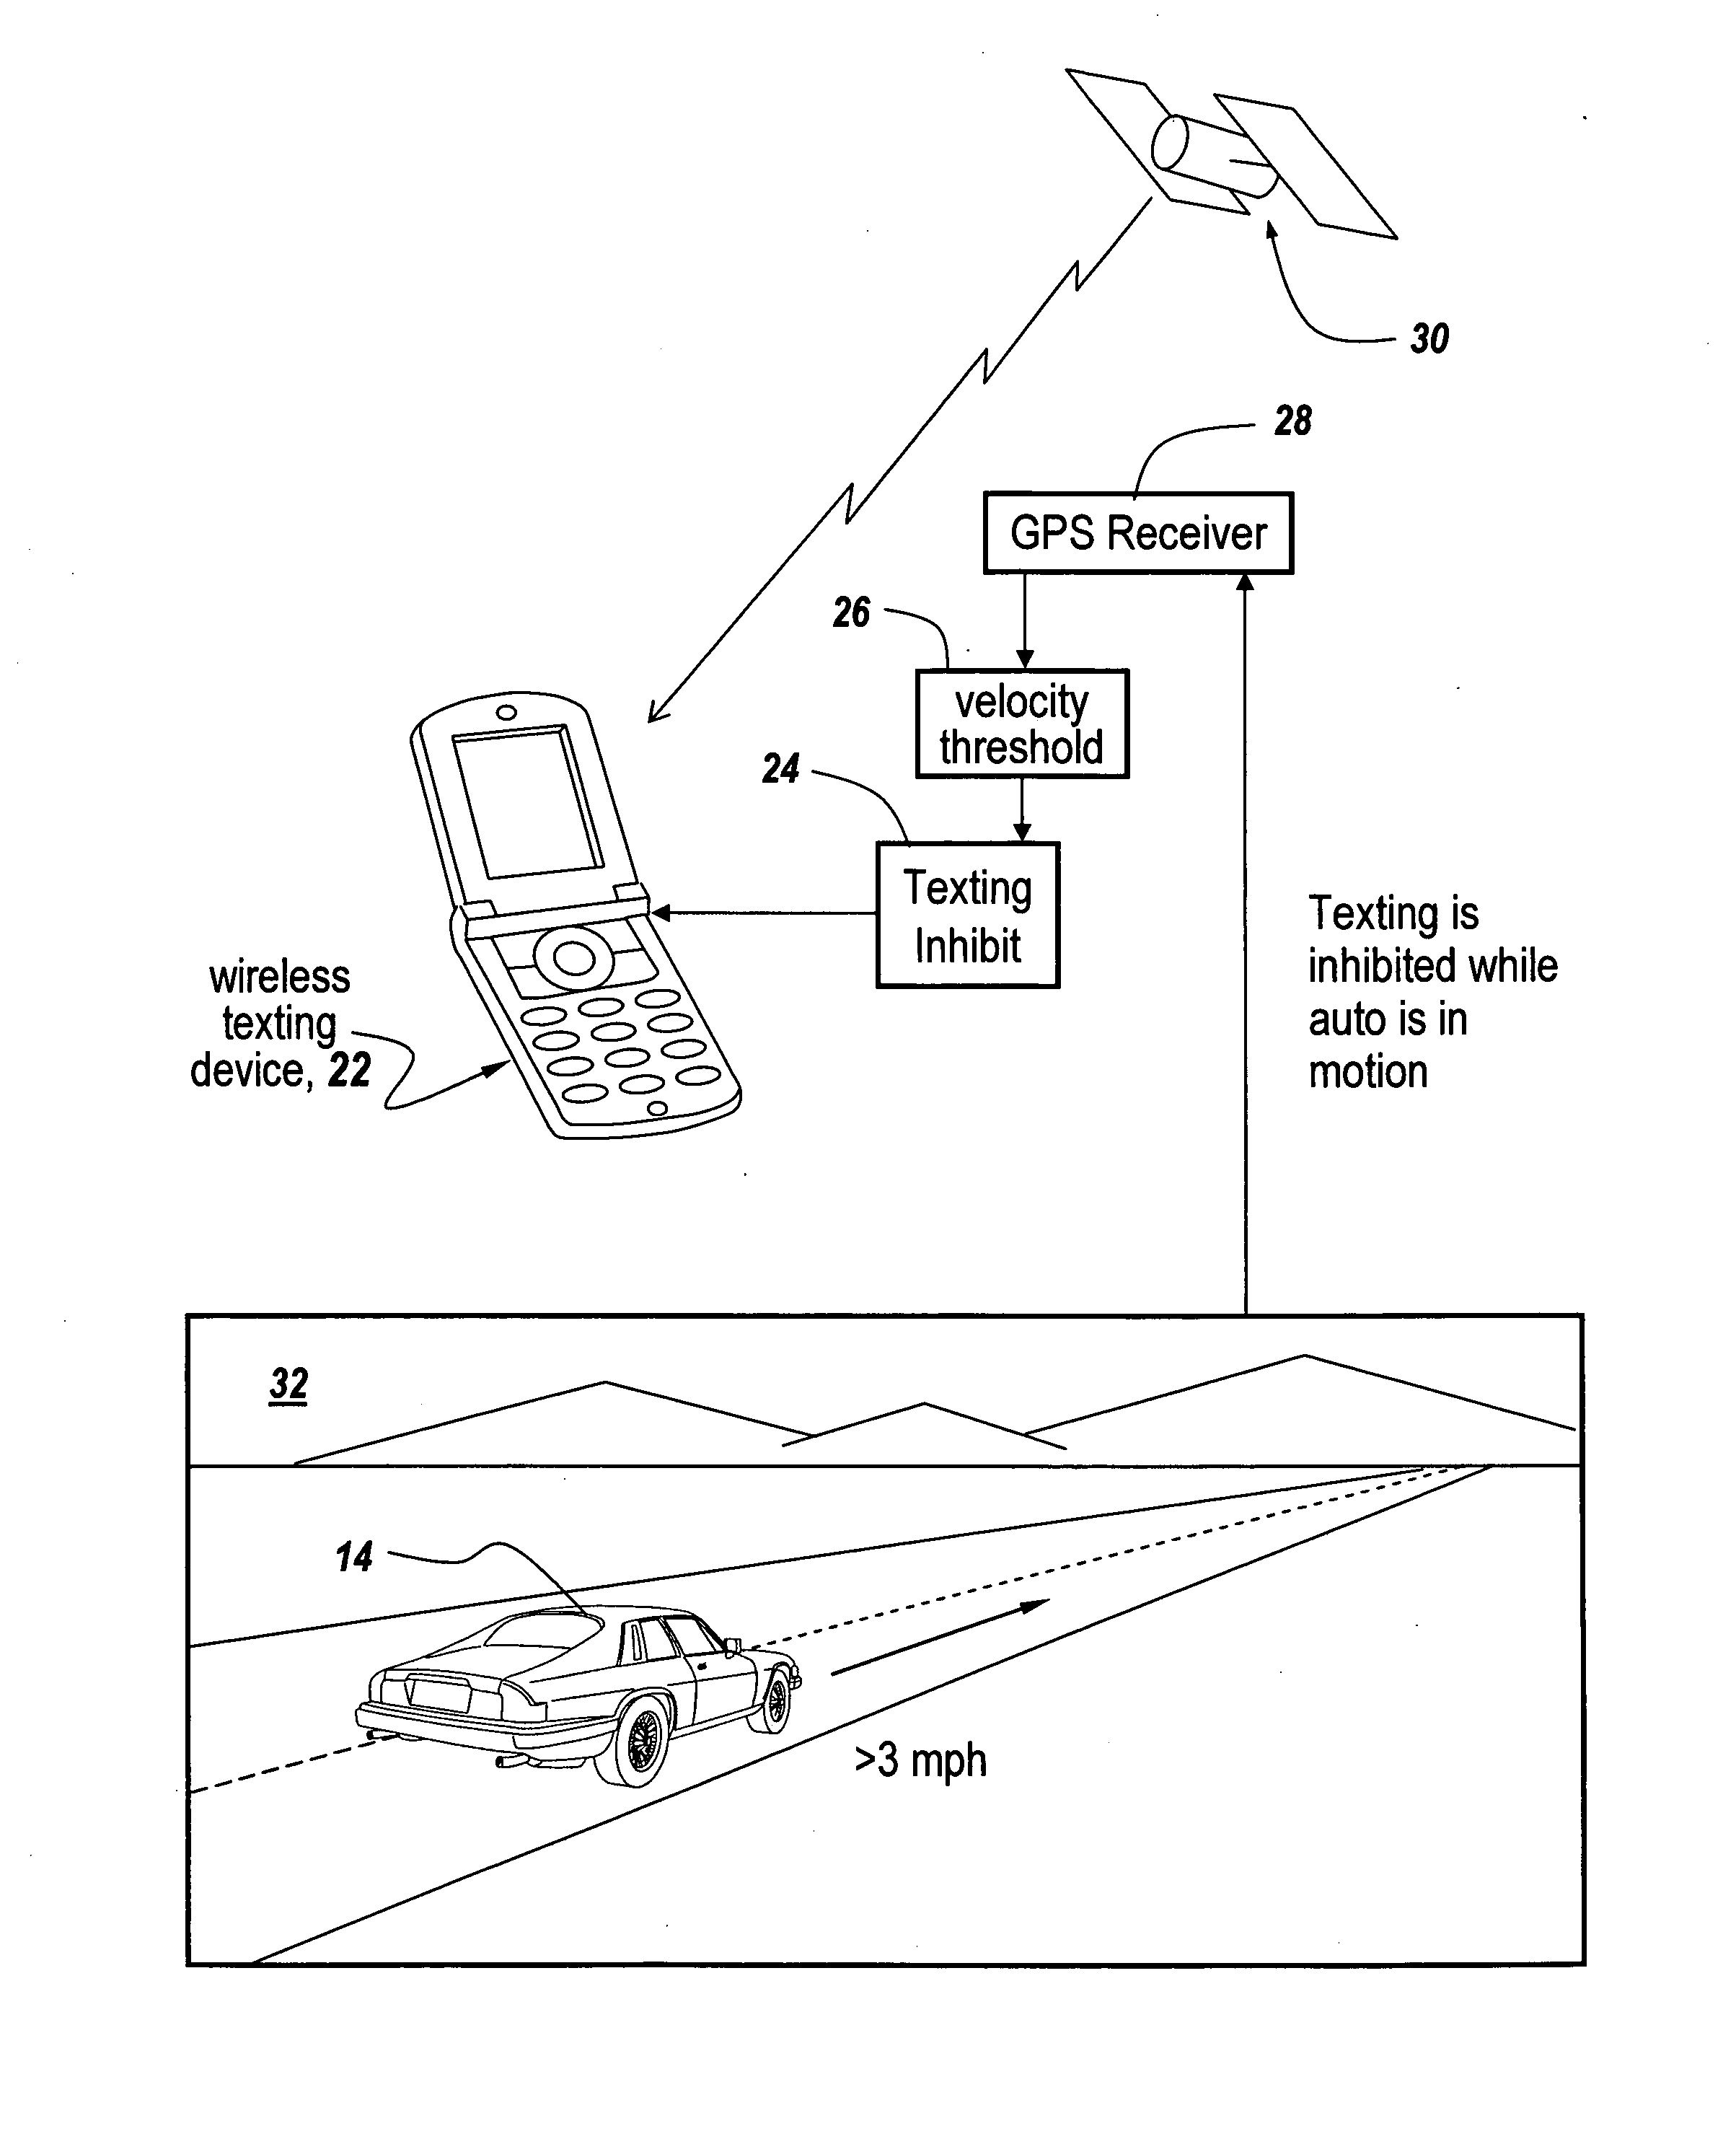 Method and apparatus for combating distracted driving